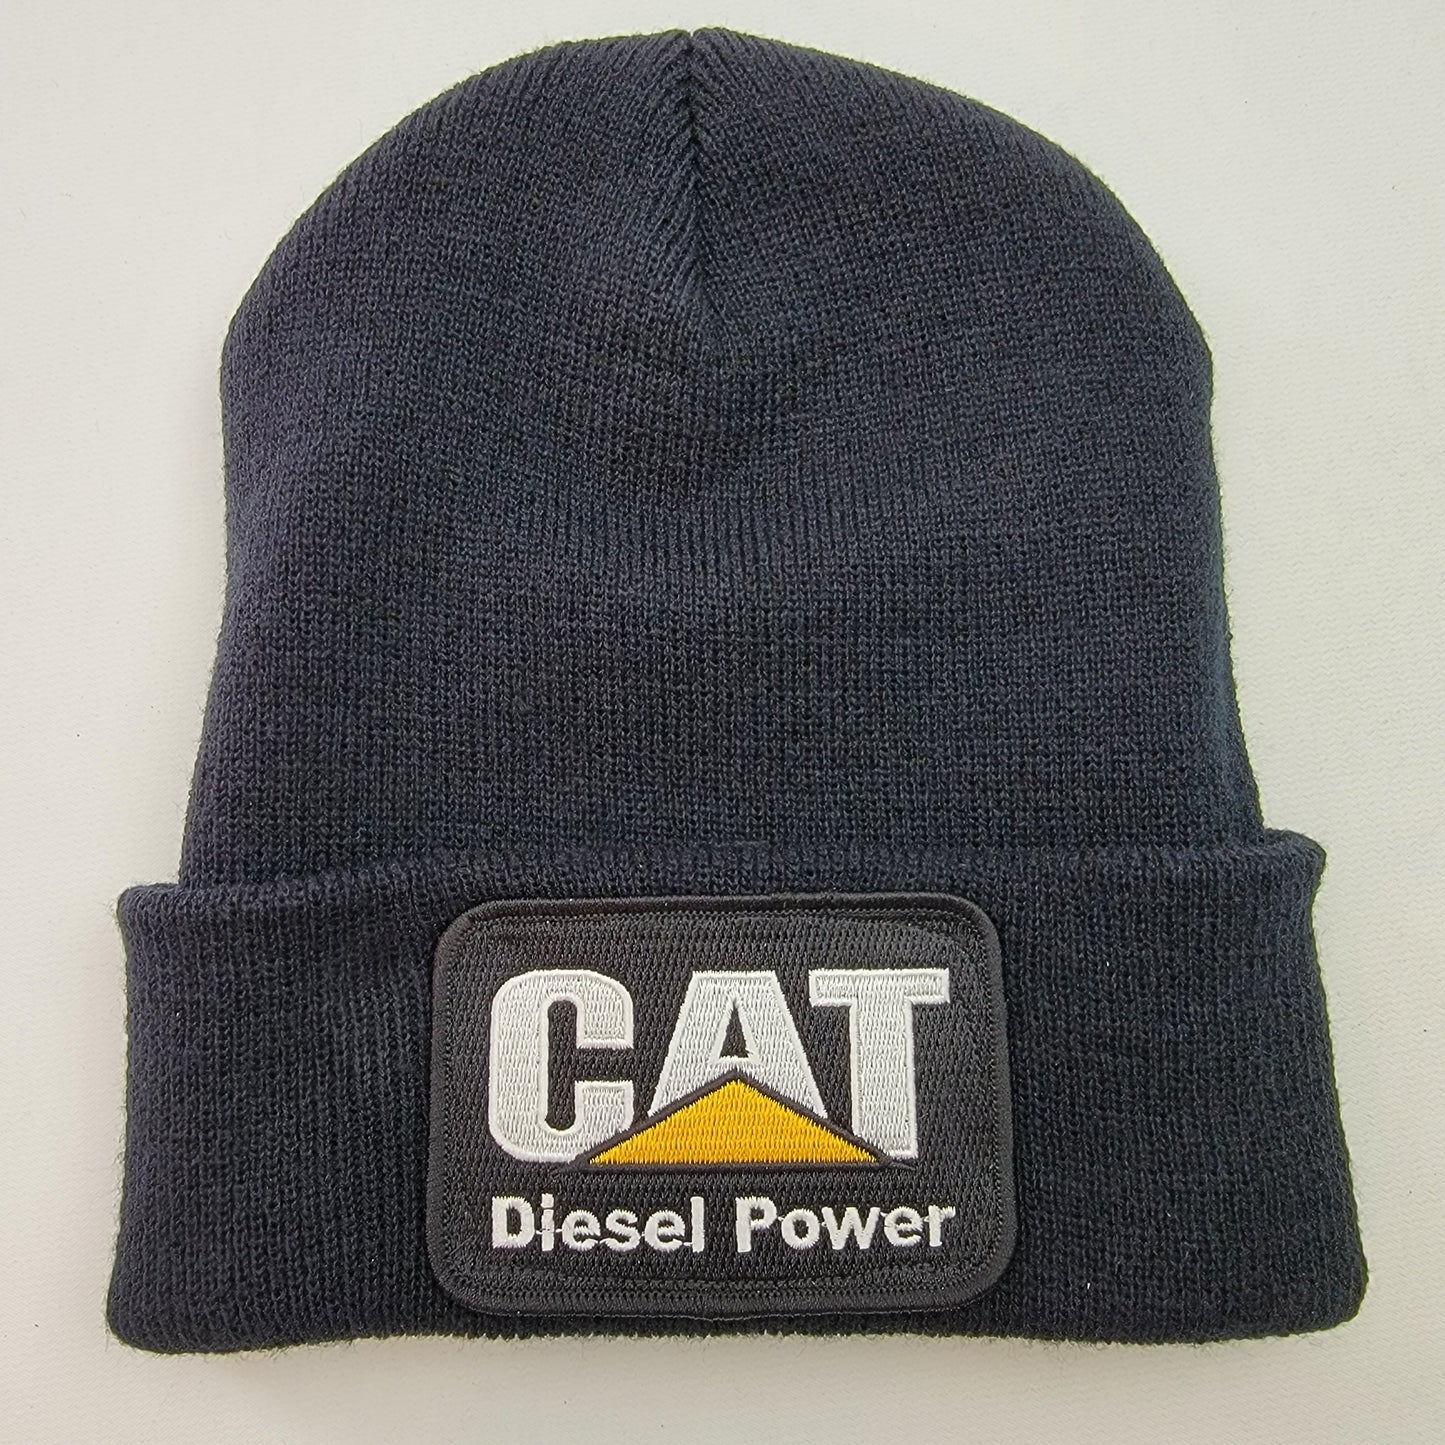 CAT Diesel Power Embroidered Patch Beanie Black Long Cuff